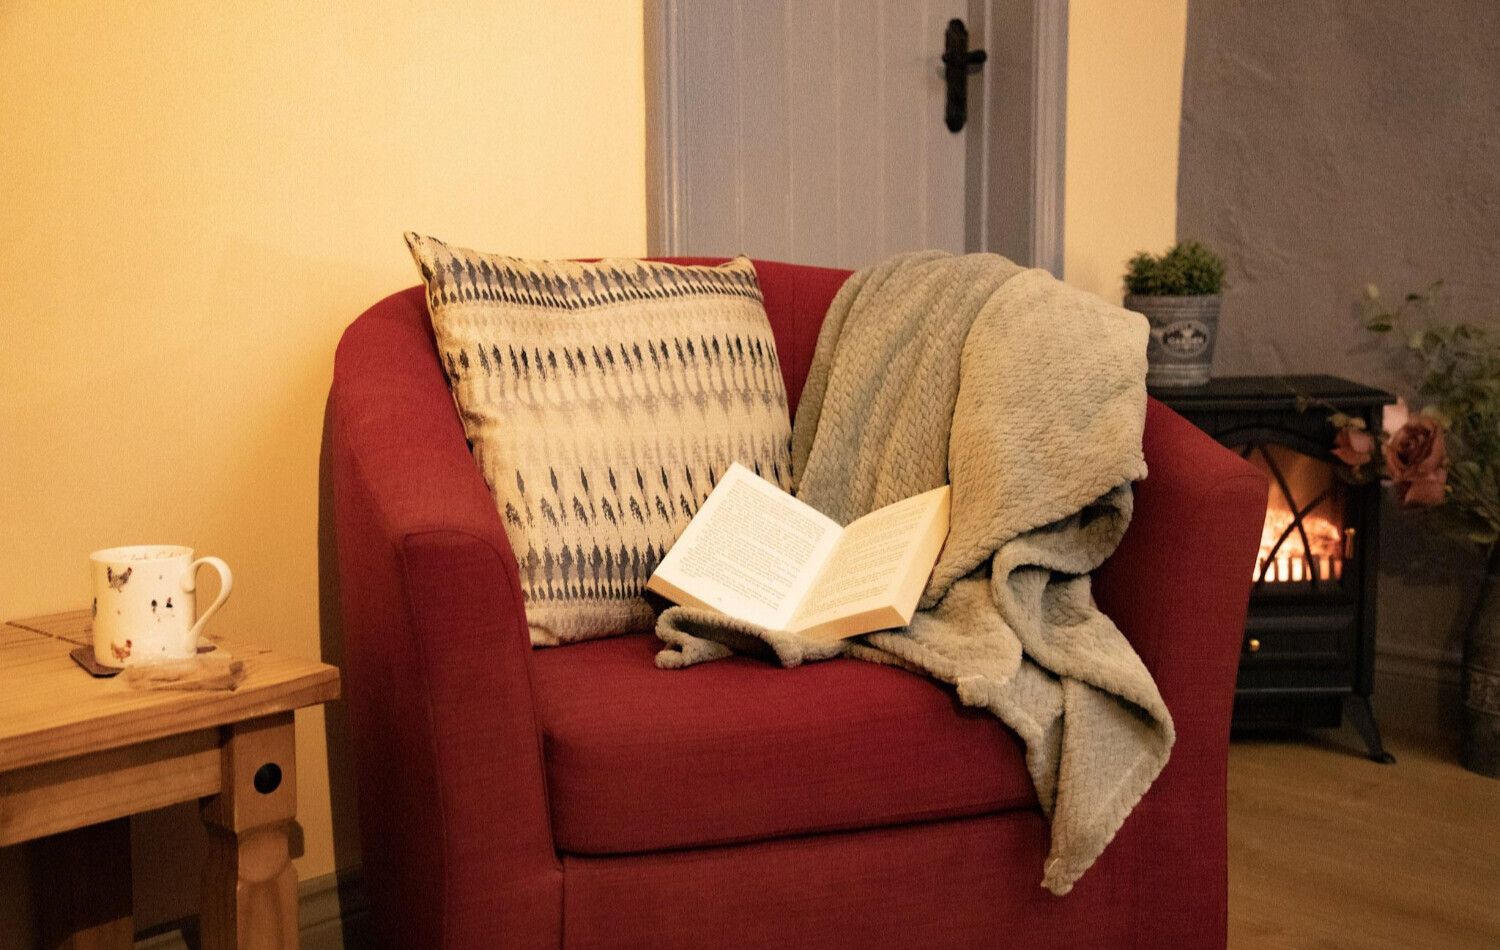 A cosy chair, blanket, and a good book by the fire